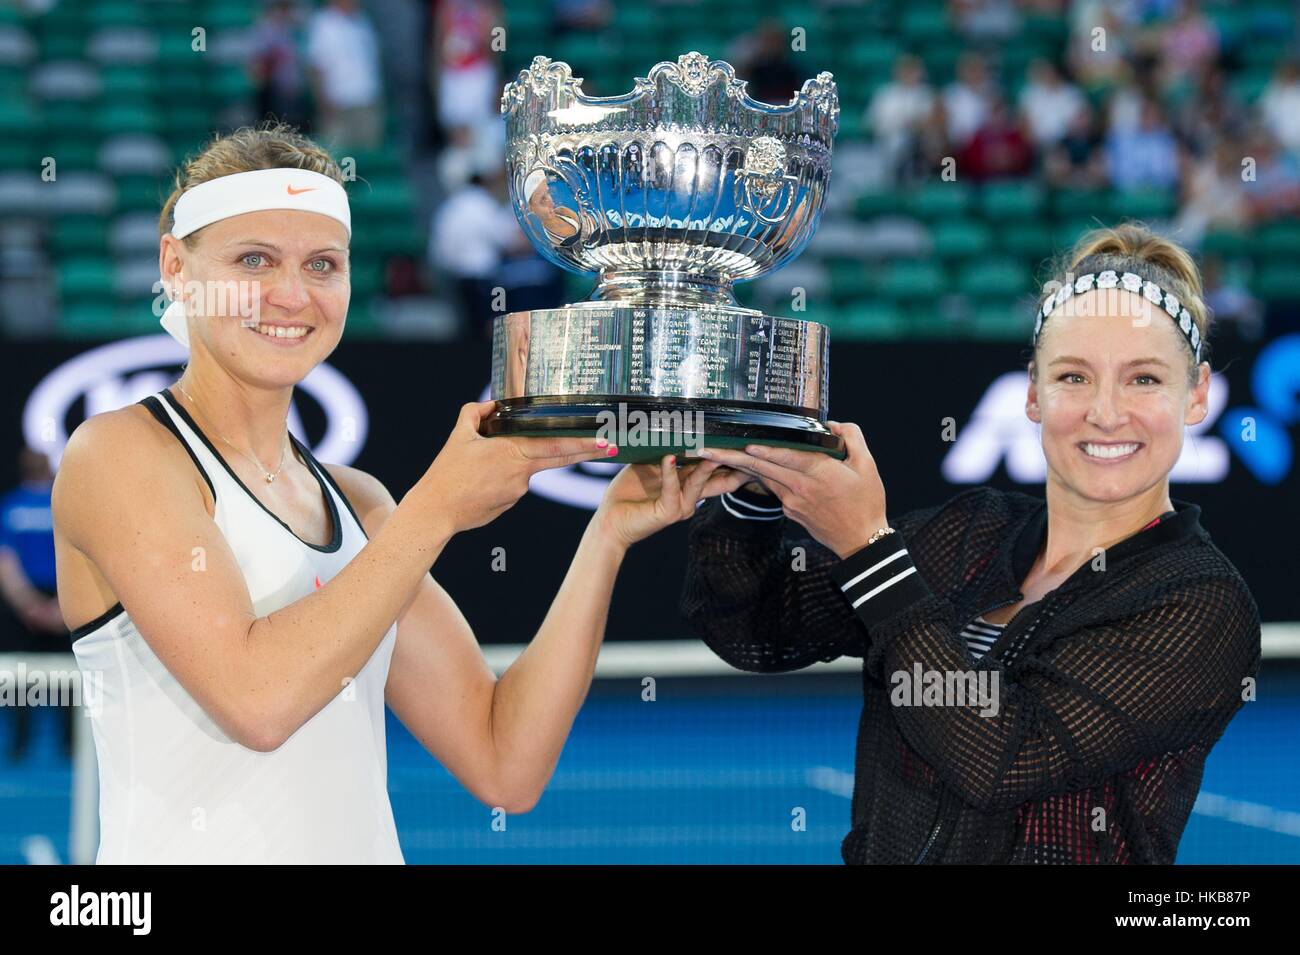 Melbourne, Australia. 27th Jan, 2017. Bethanie Mattek-Sands (R) of the U.S. and Lucie Safarova of the Czech Republic pose for photos after winning the women's doubles final against Andrea Hlavackova of the Czech Republic and Peng Shuai of China at the Australian Open tennis championships in Melbourne, Australia, Jan. 27, 2017. Bethanie Mattek-Sands of the U.S. and Lucie Safarova of the Czech Republic won 2-1. Credit: Bai Xue/Xinhua/Alamy Live News Stock Photo